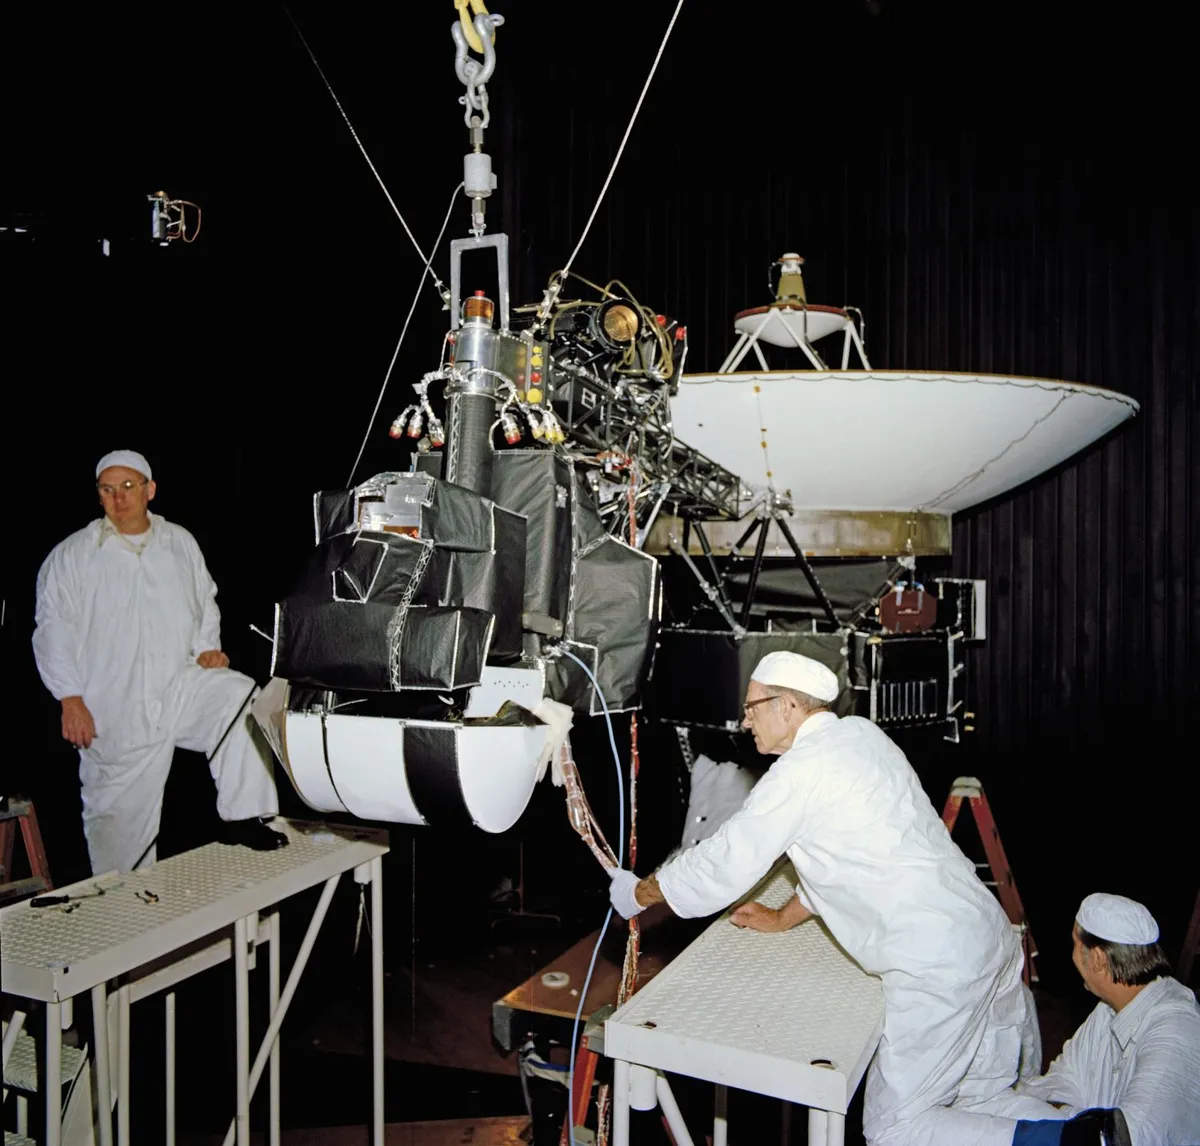 One of the Voyager spacecraft undergoing tests at NASA's Jet Propulsion Laboratory, April 1977. Credit: NASA/JPL-Caltech